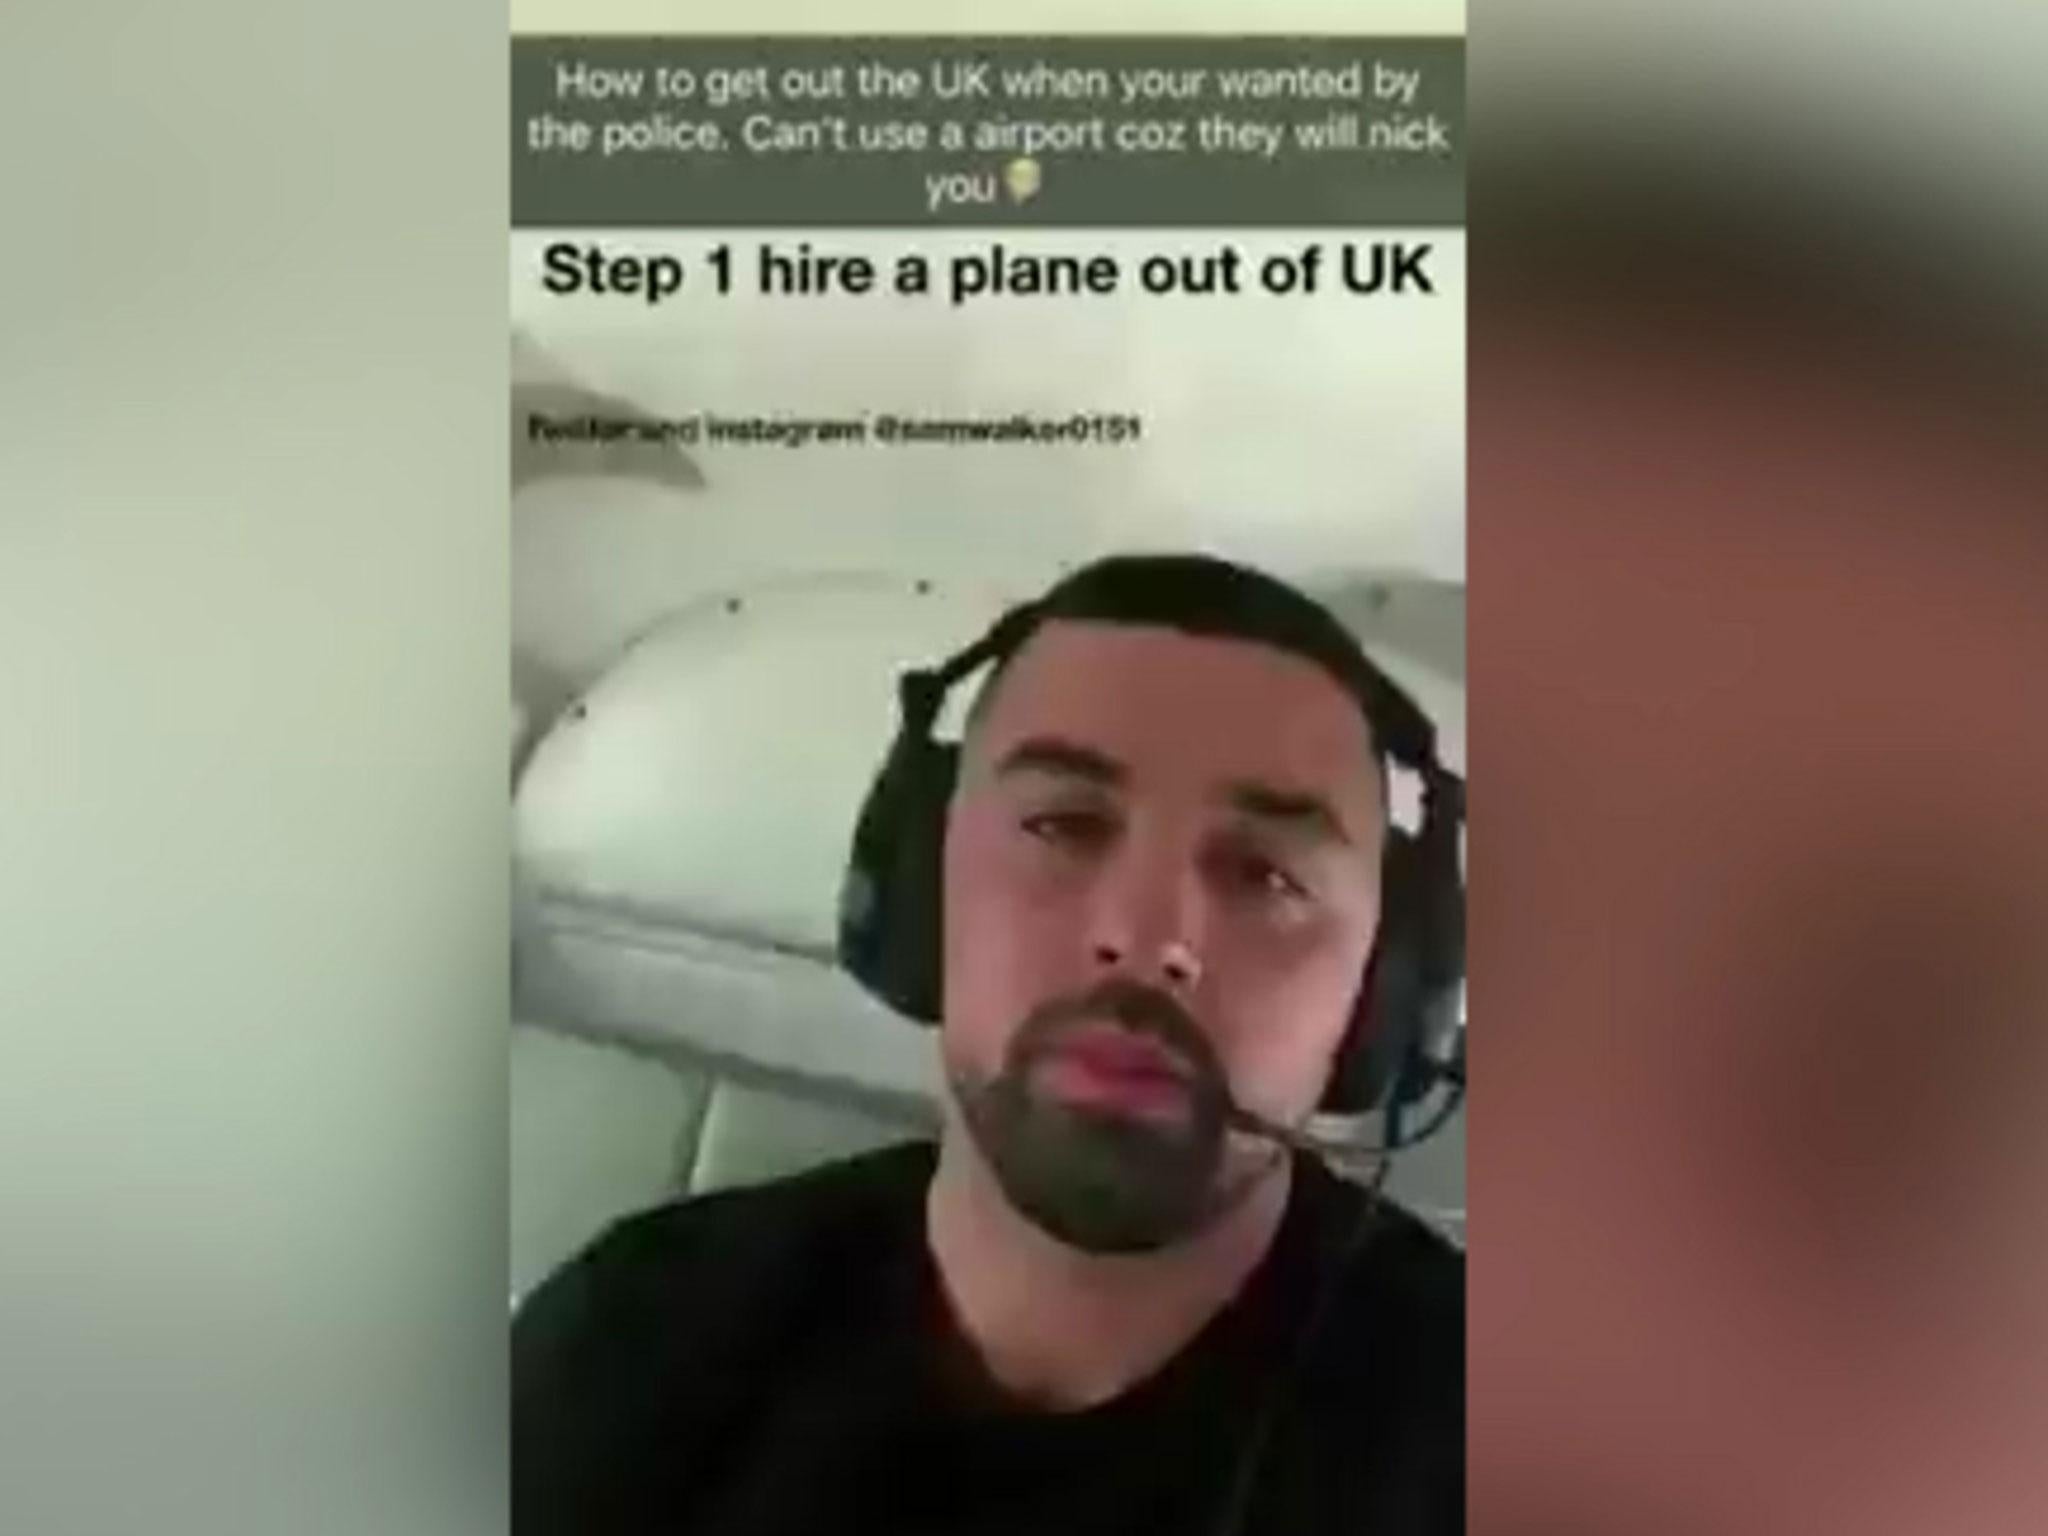 Walker’s video details ‘how to flee the UK when wanted by police’